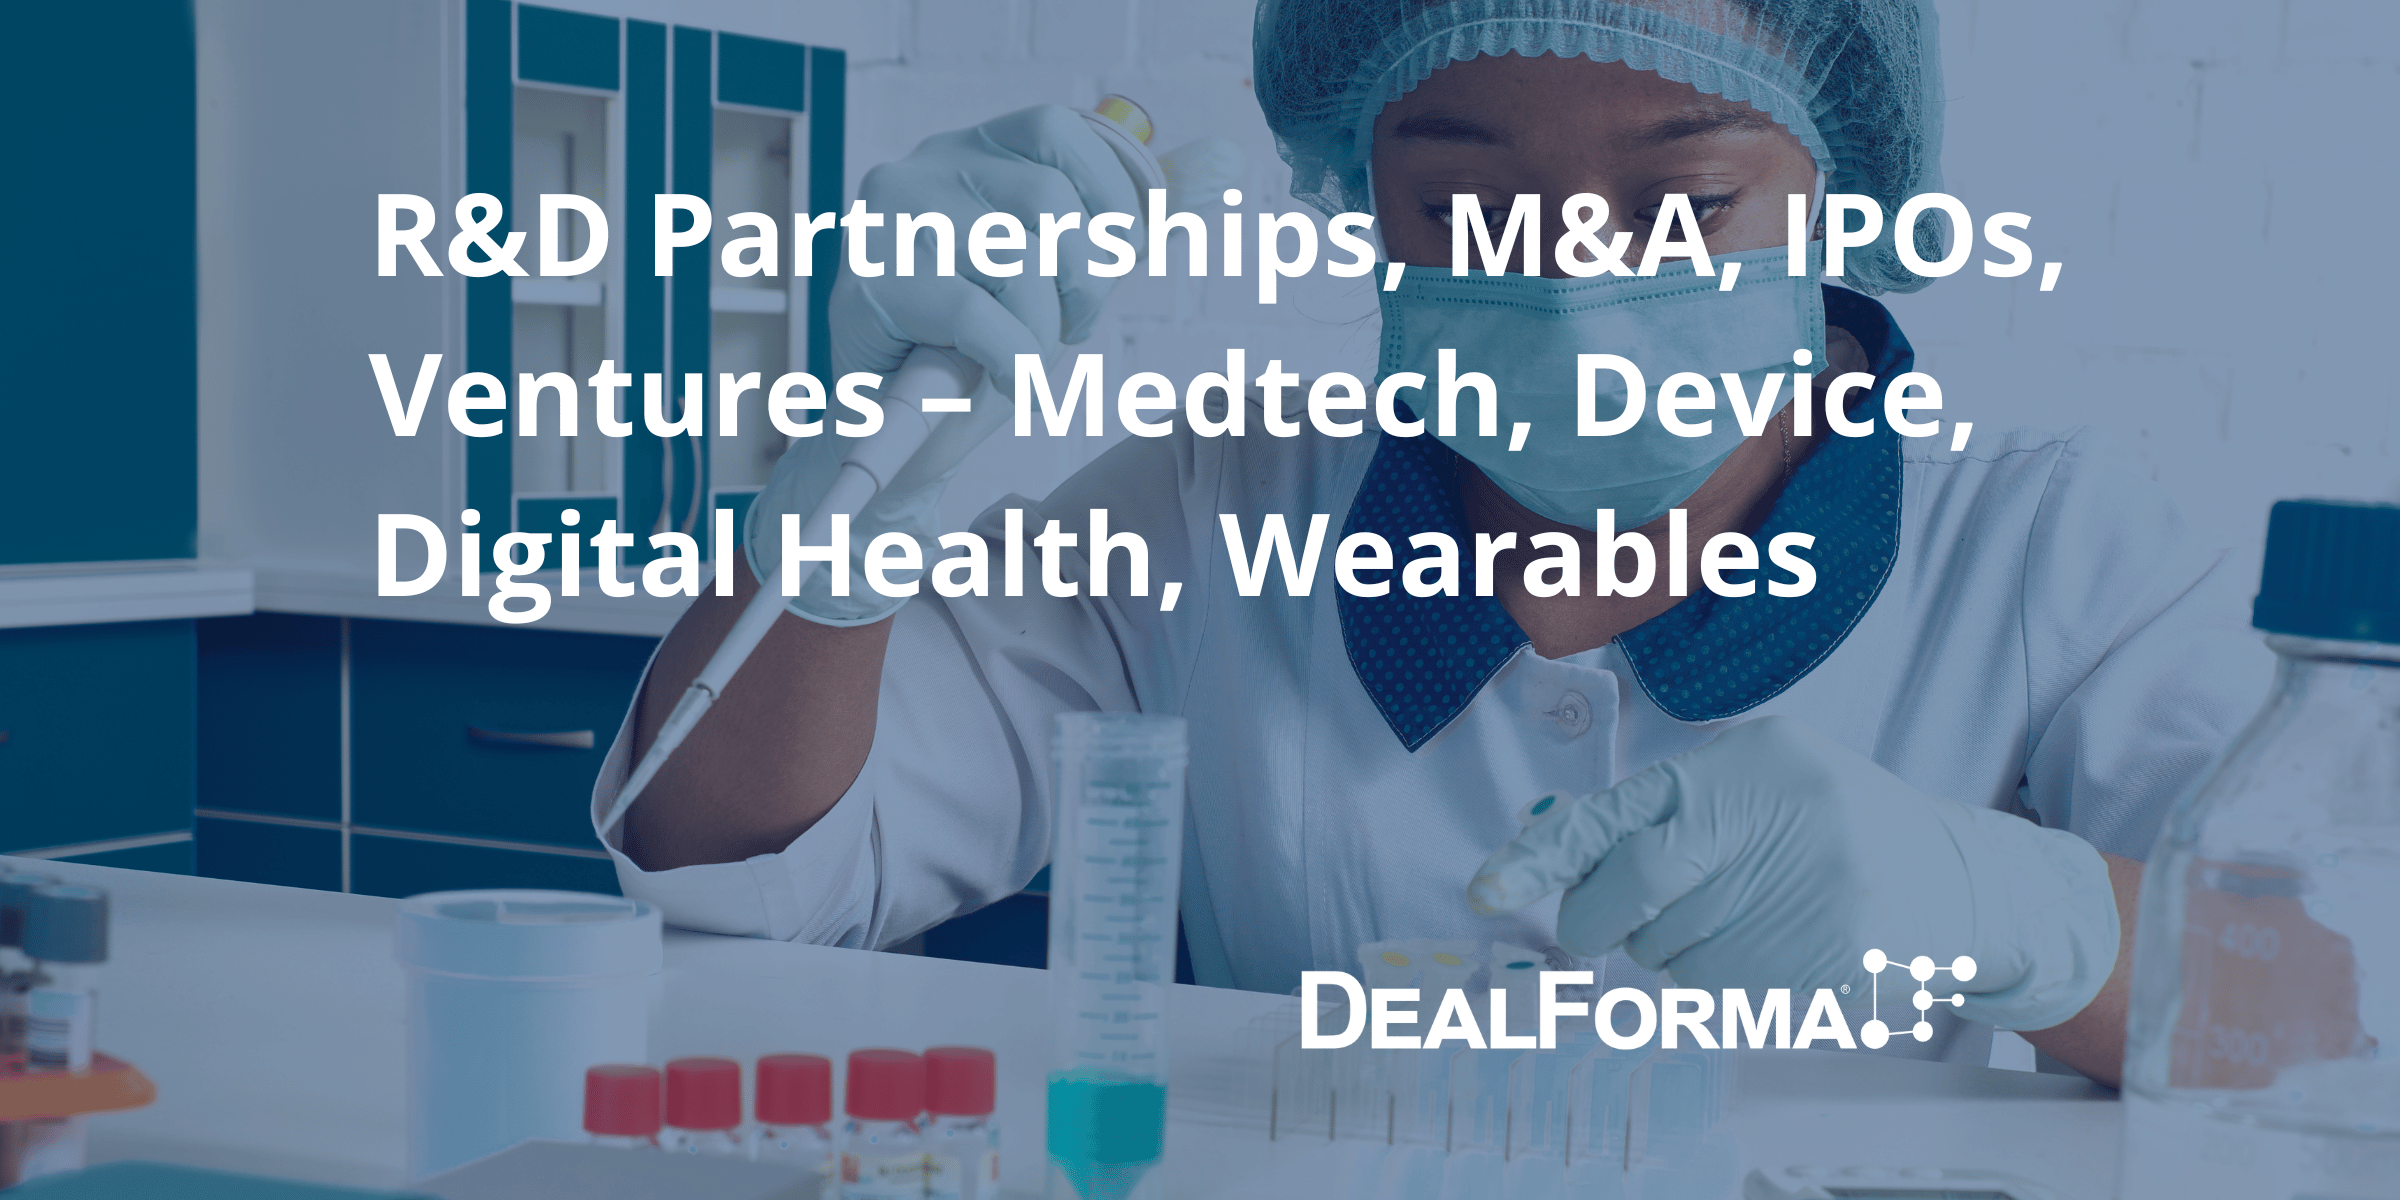 R&D Partnerships, M&A, IPOs, Ventures – Medtech, Device, Digital Health, Wearables